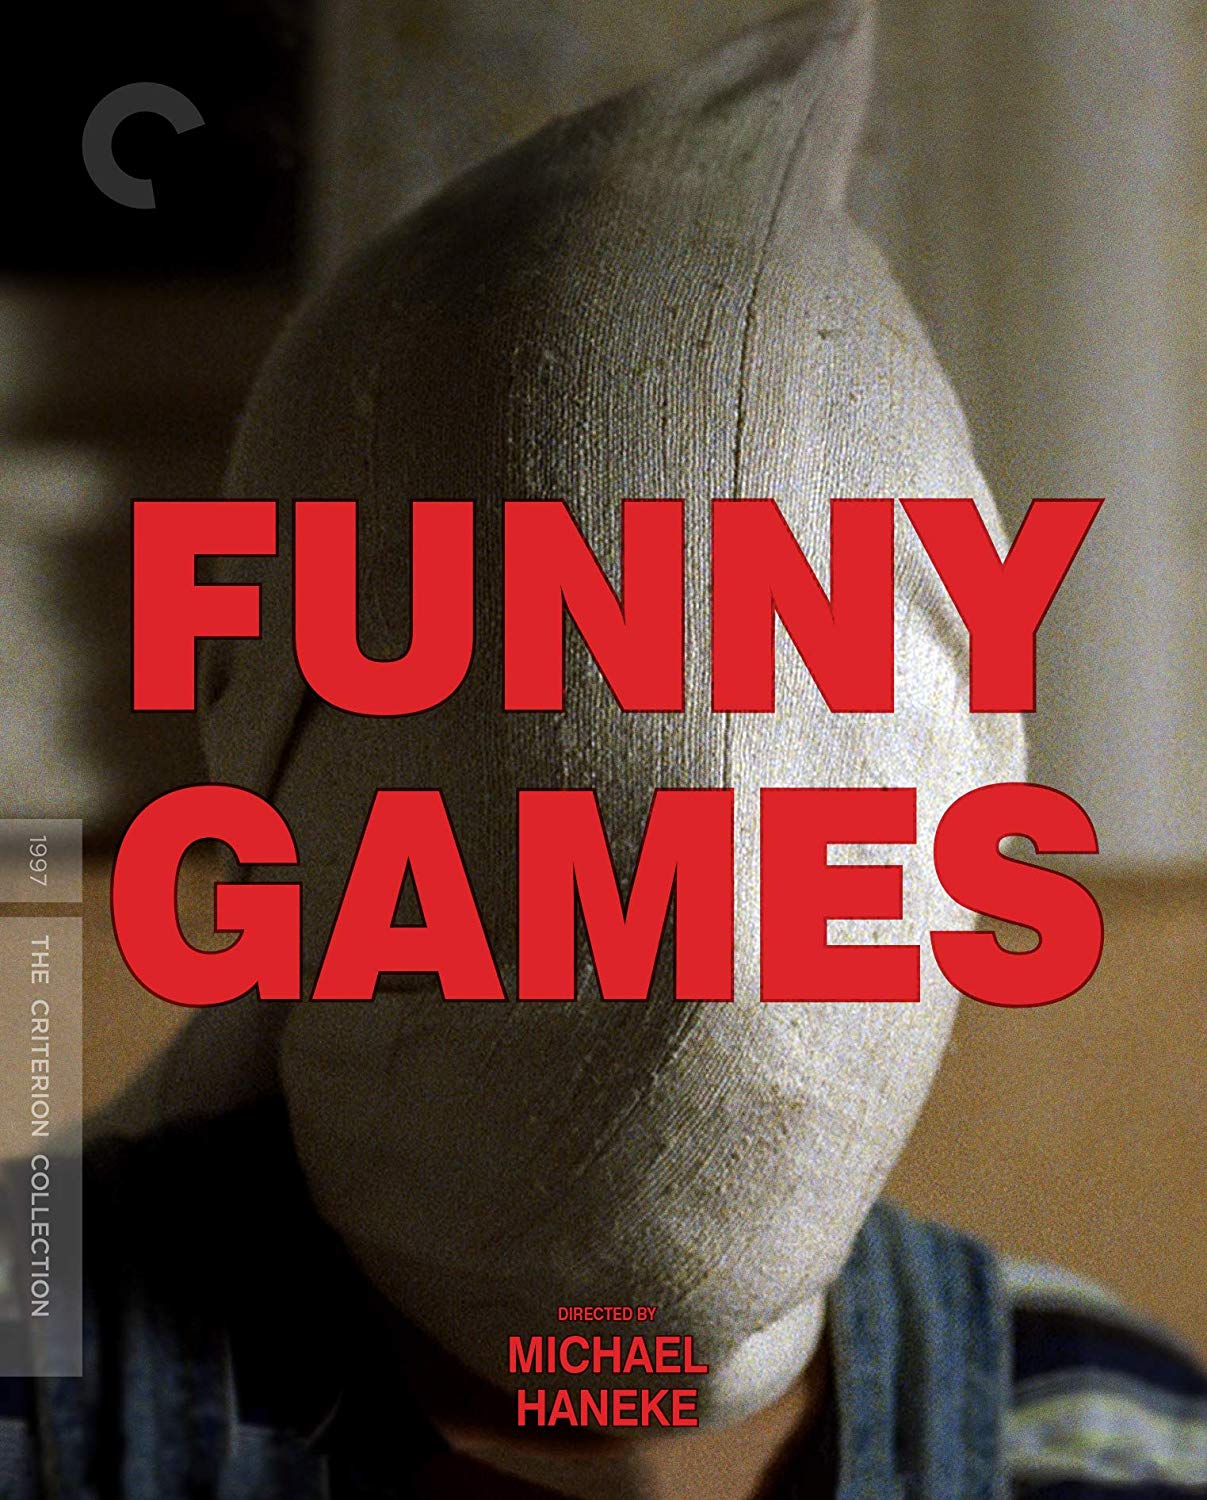 Funny Games [Criterion Collection] [Blu-ray] [1997] - Best Buy